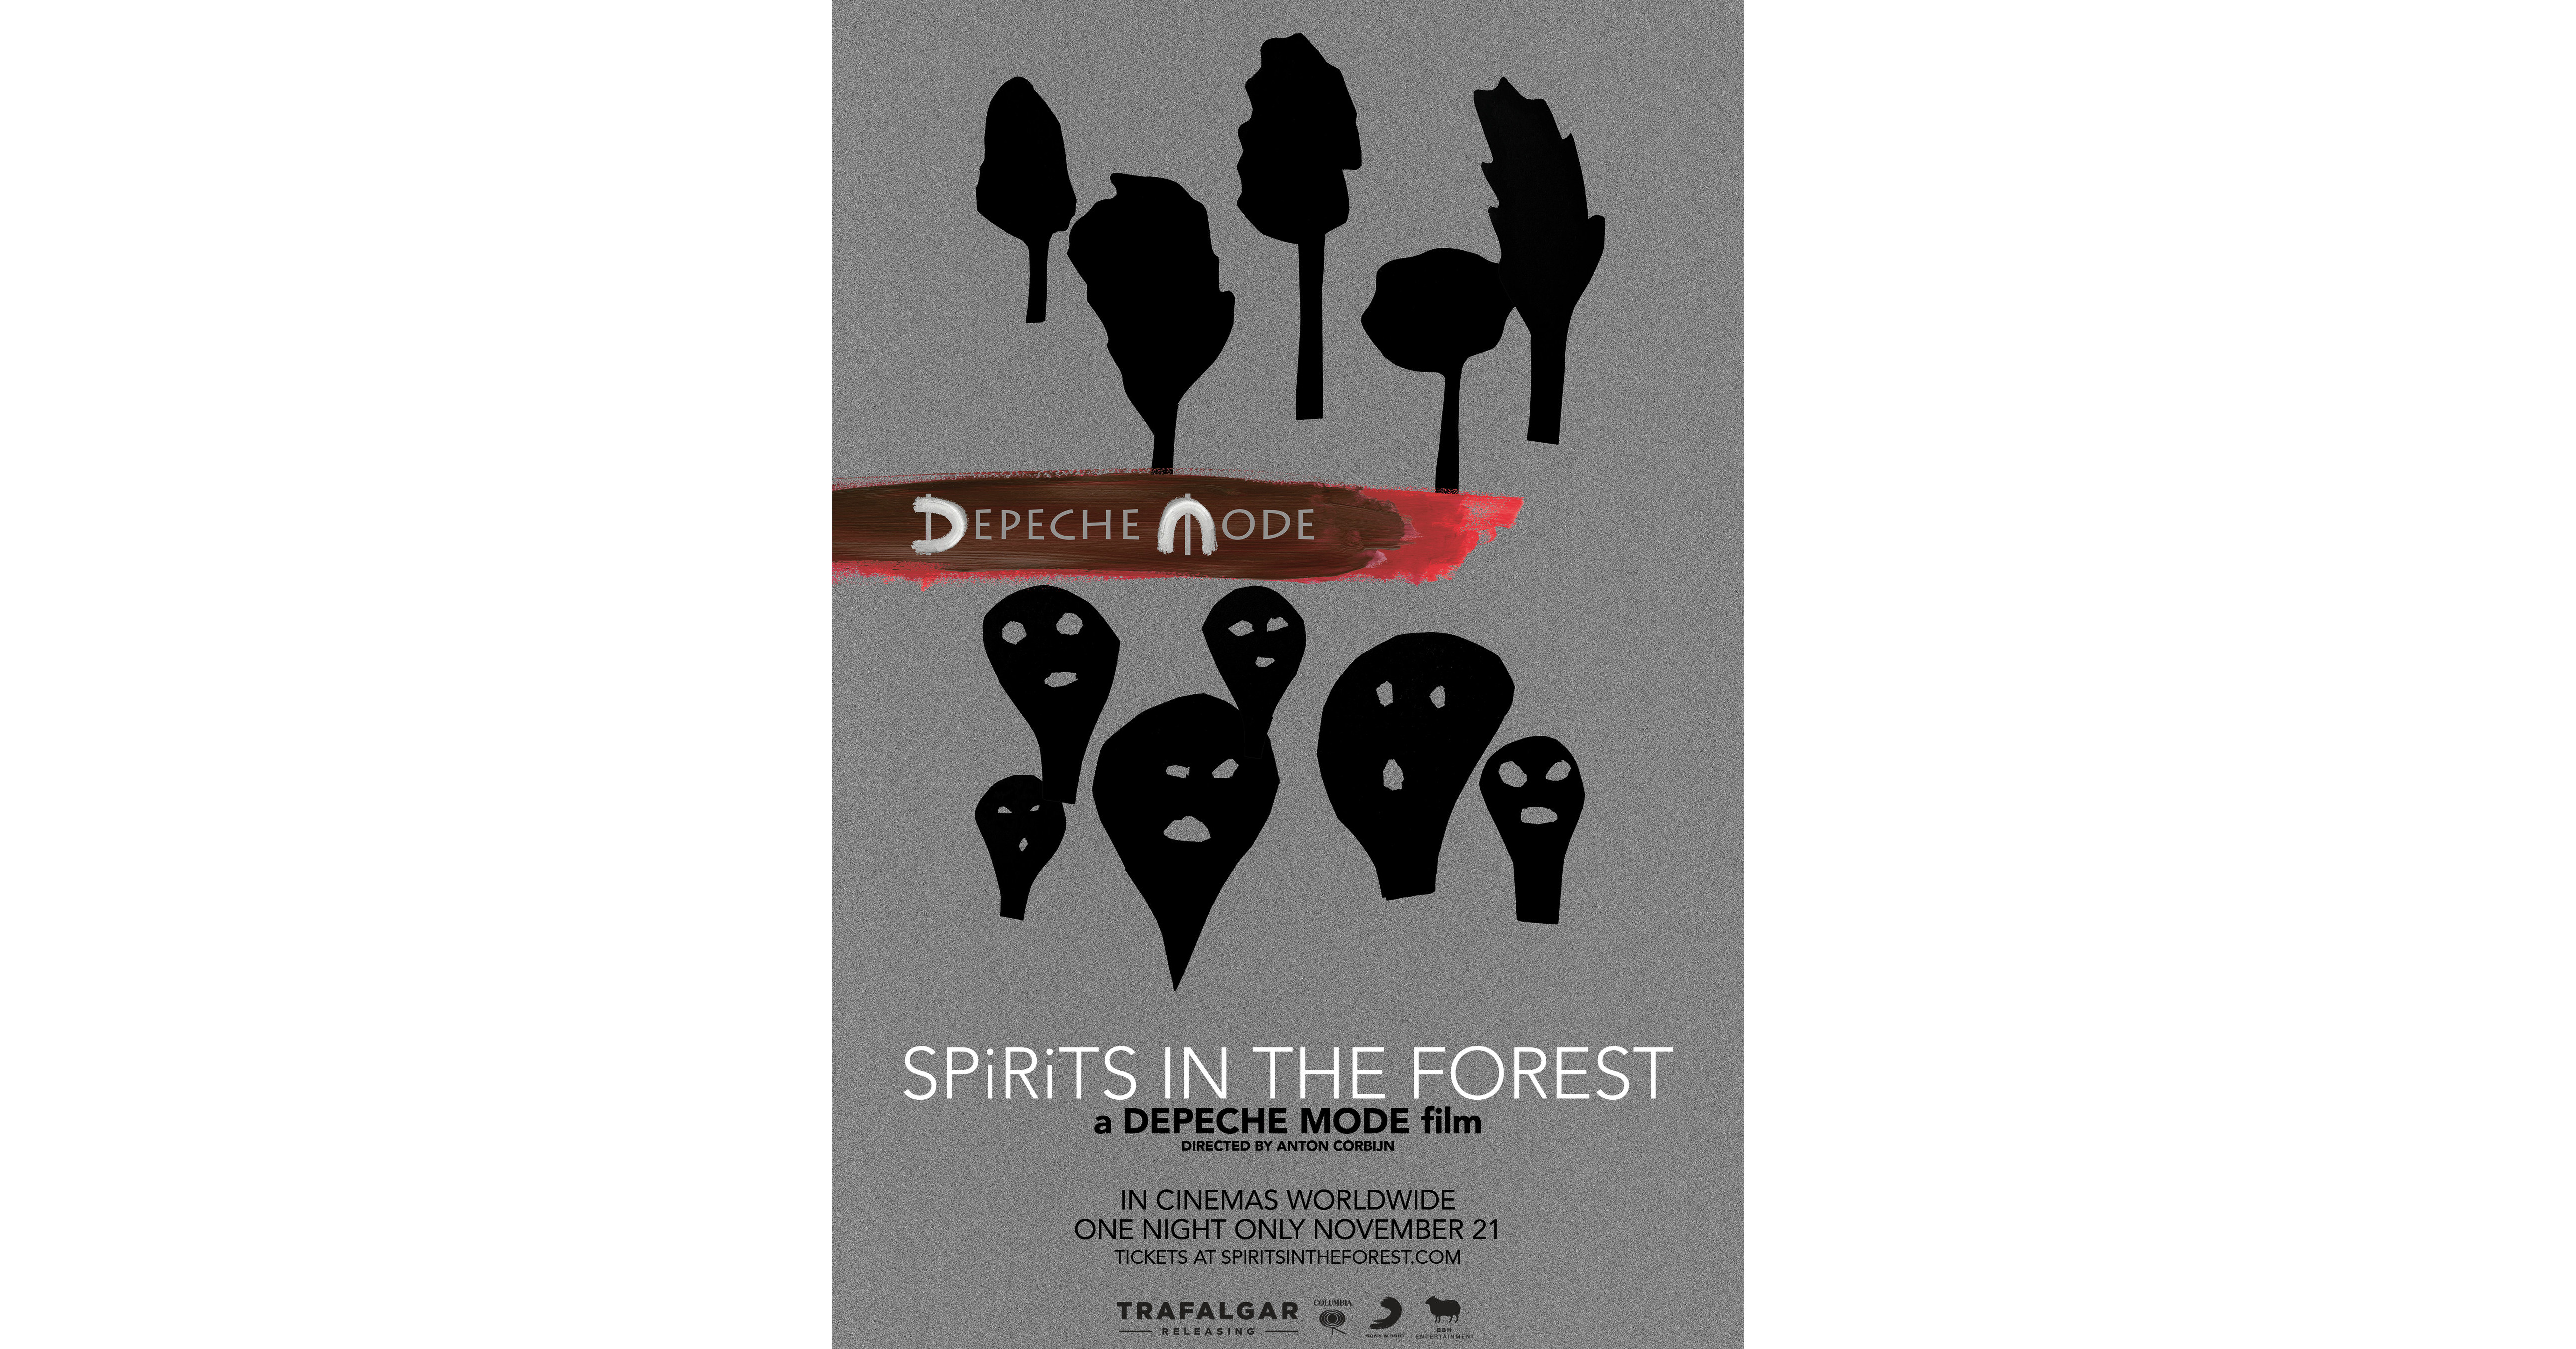 Official Trailer Unveiled For Depeche Mode Spirits In The Forest